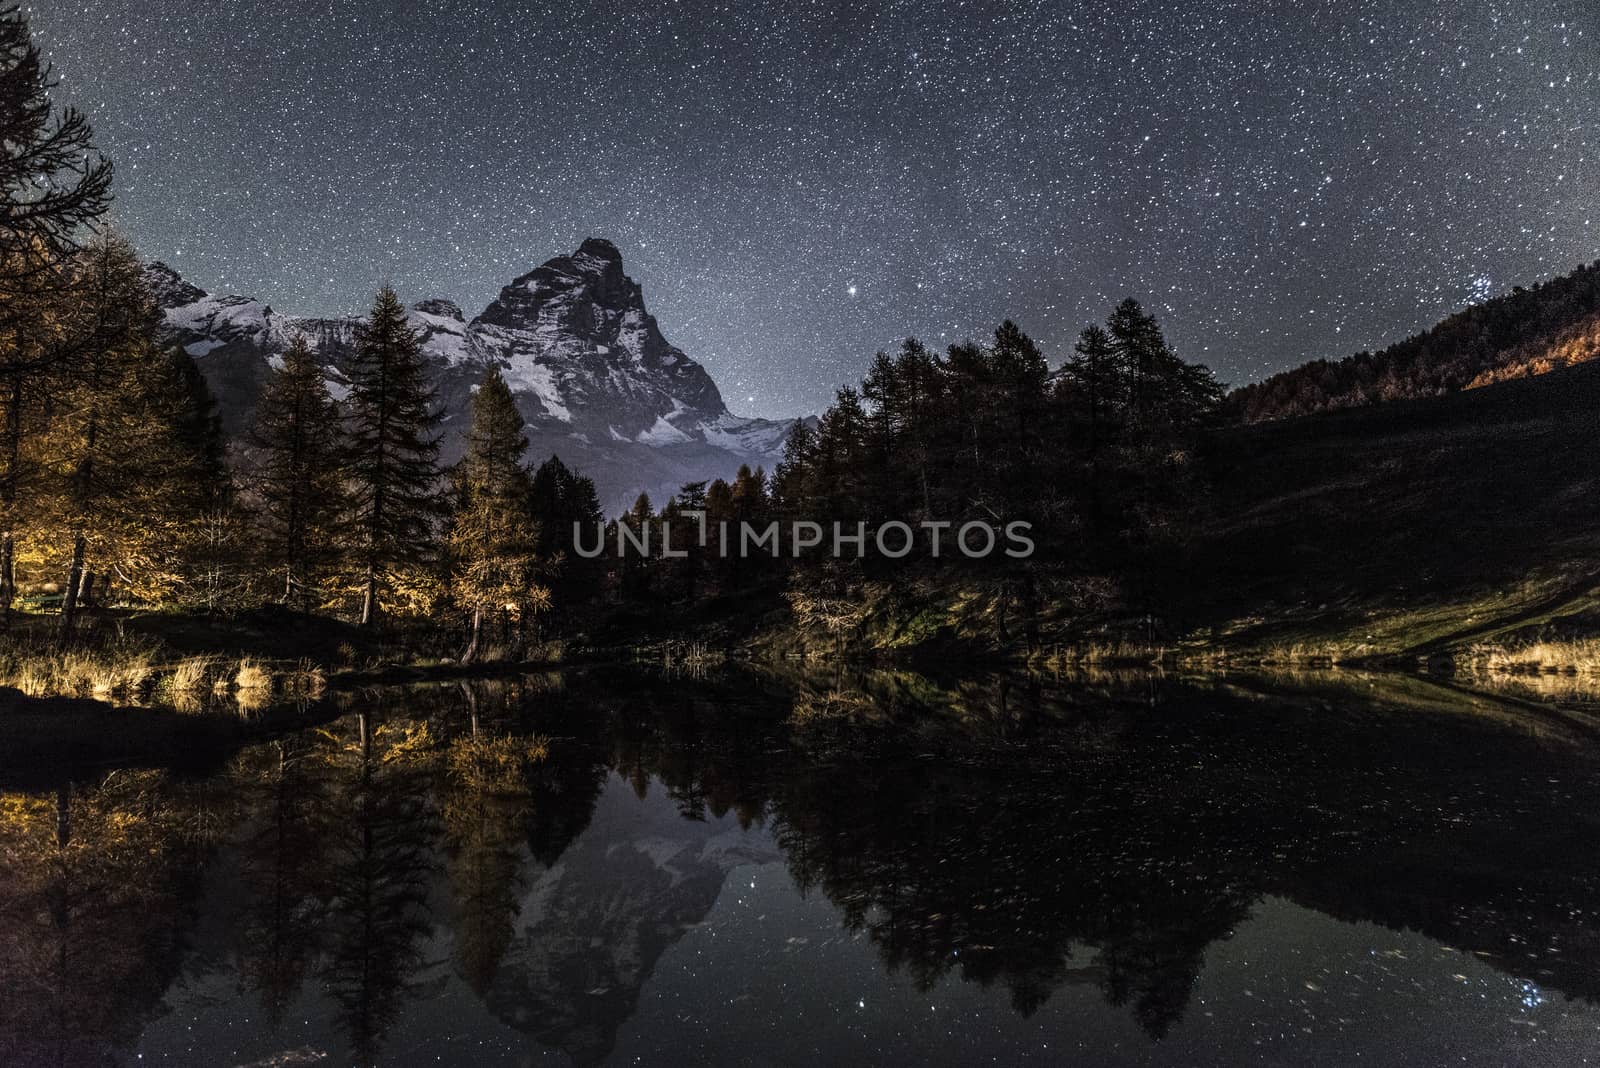 Mount Cervino and Blue Lake in an autumn night by Mdc1970